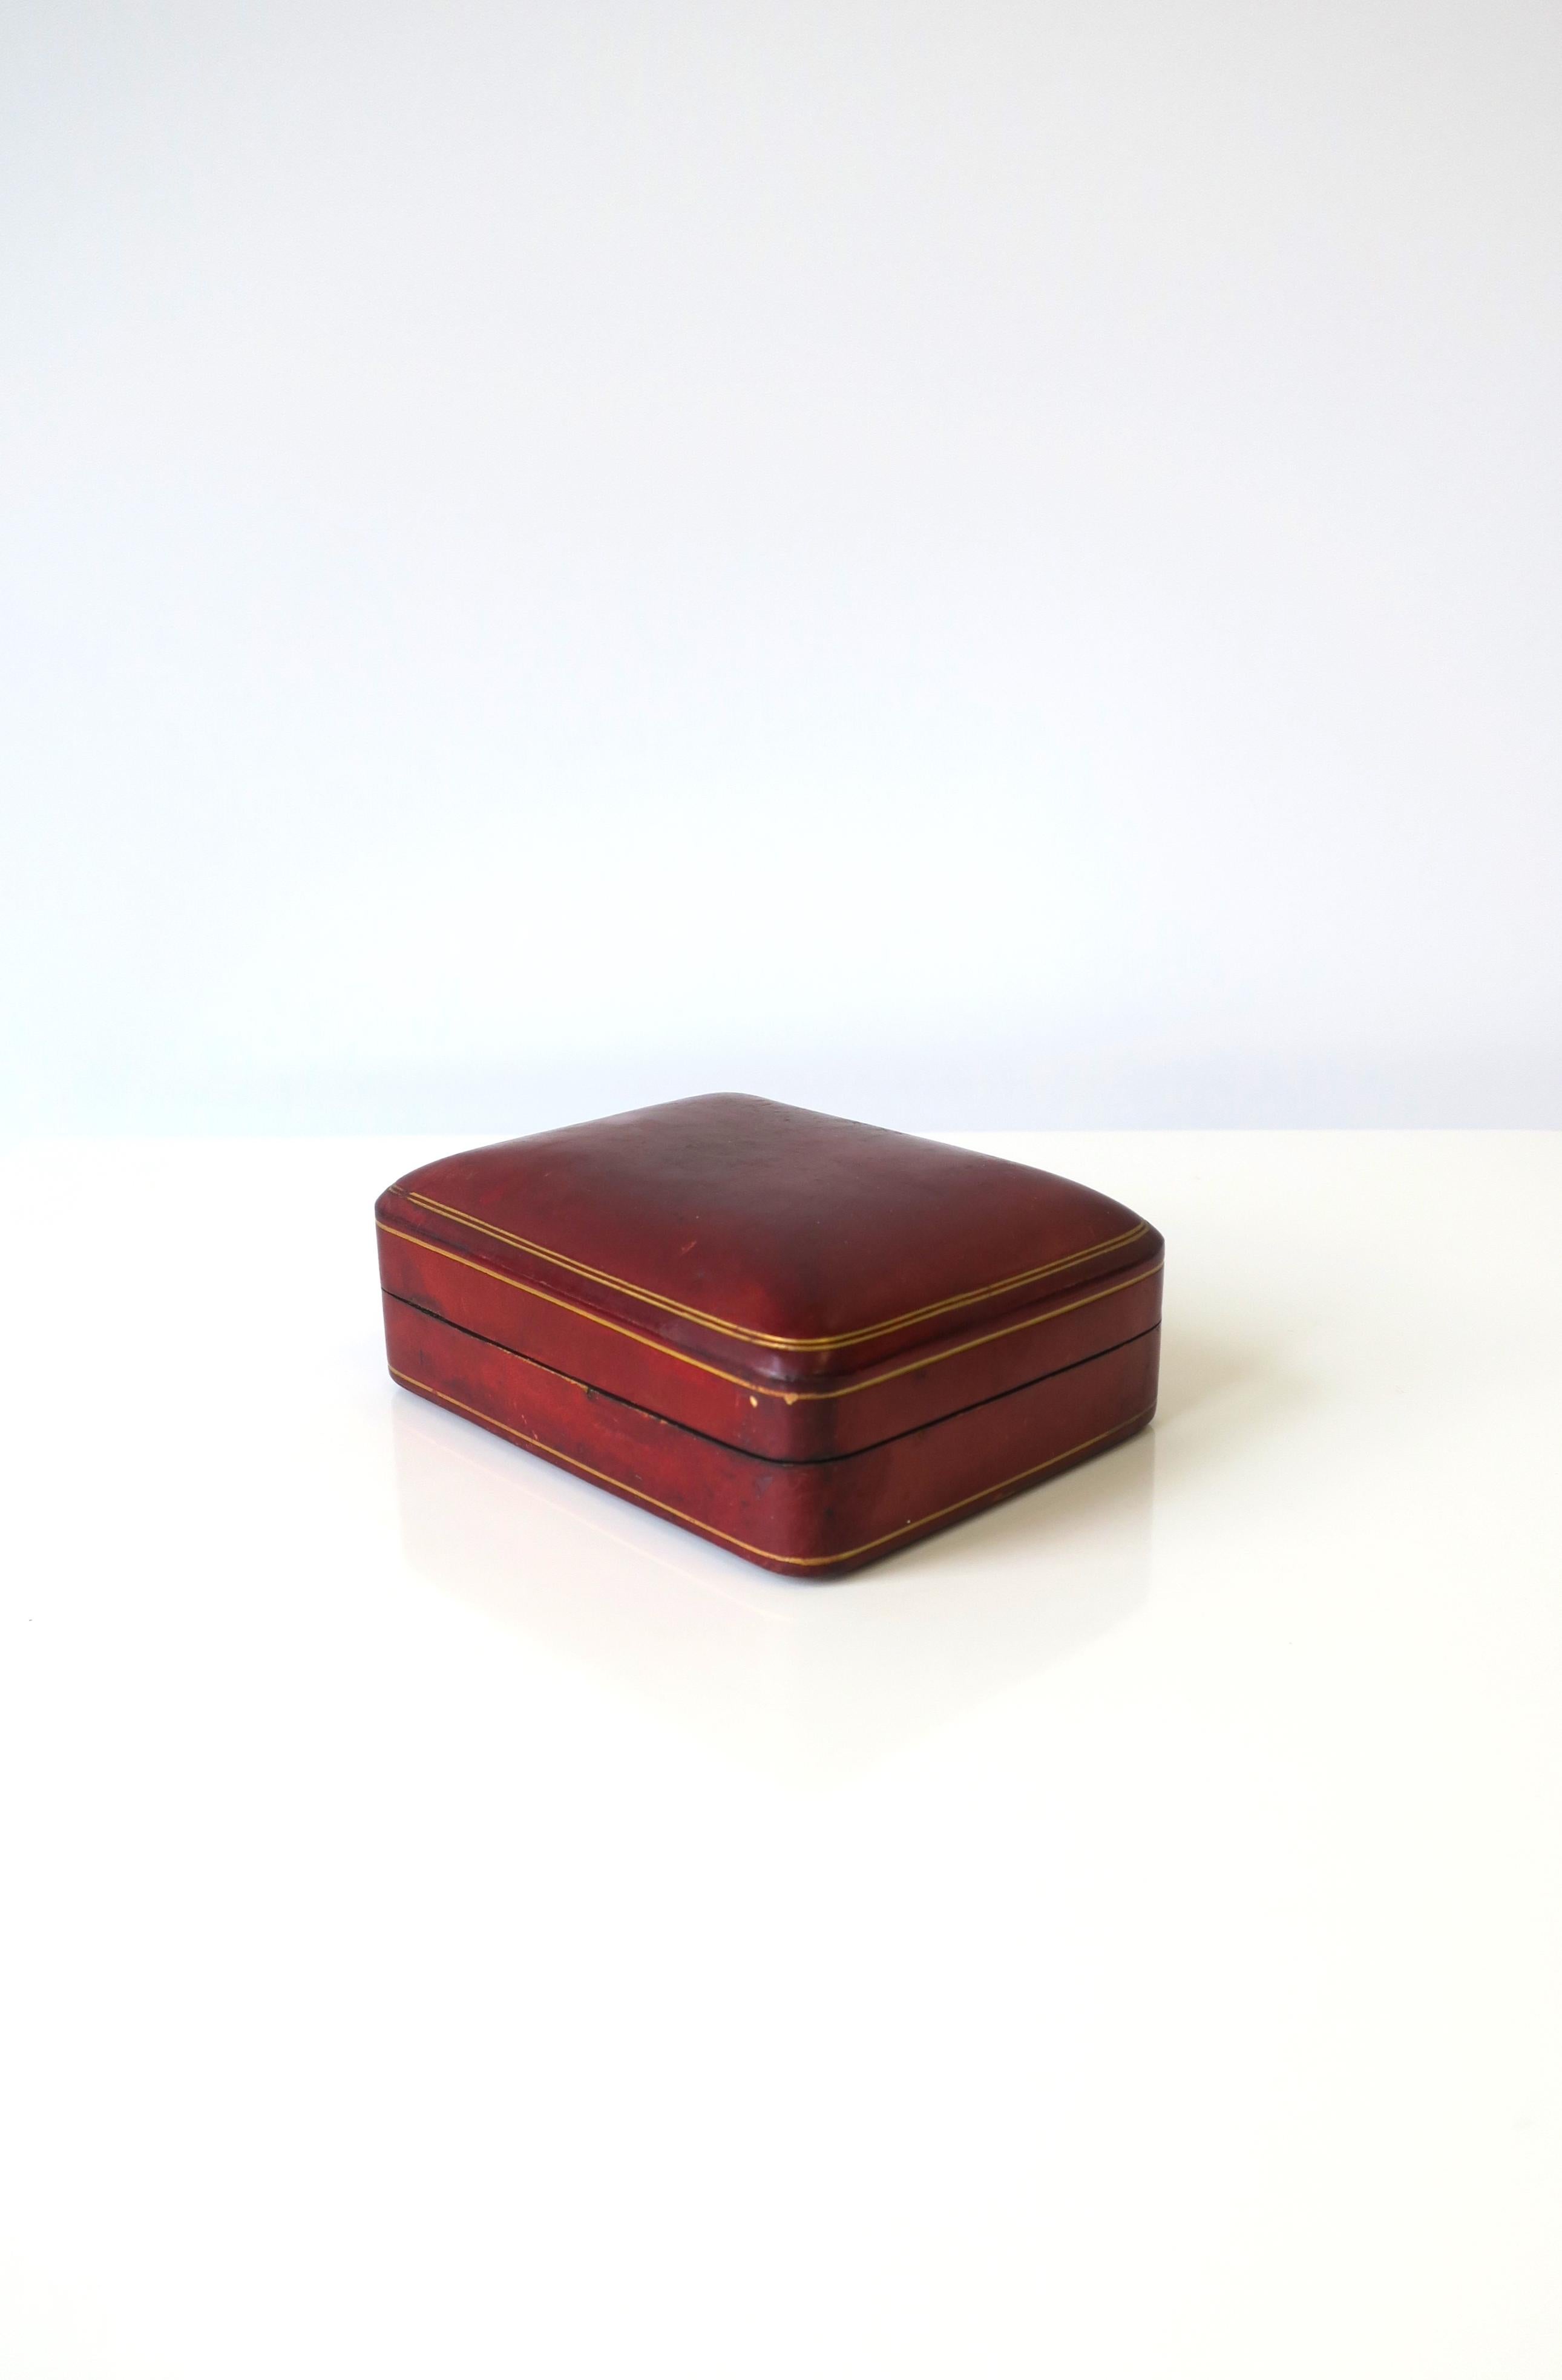 A beautiful vintage Italian all leather jewelry box in red burgundy with gold embossing, circa mid-20th century, Italy. Marked 